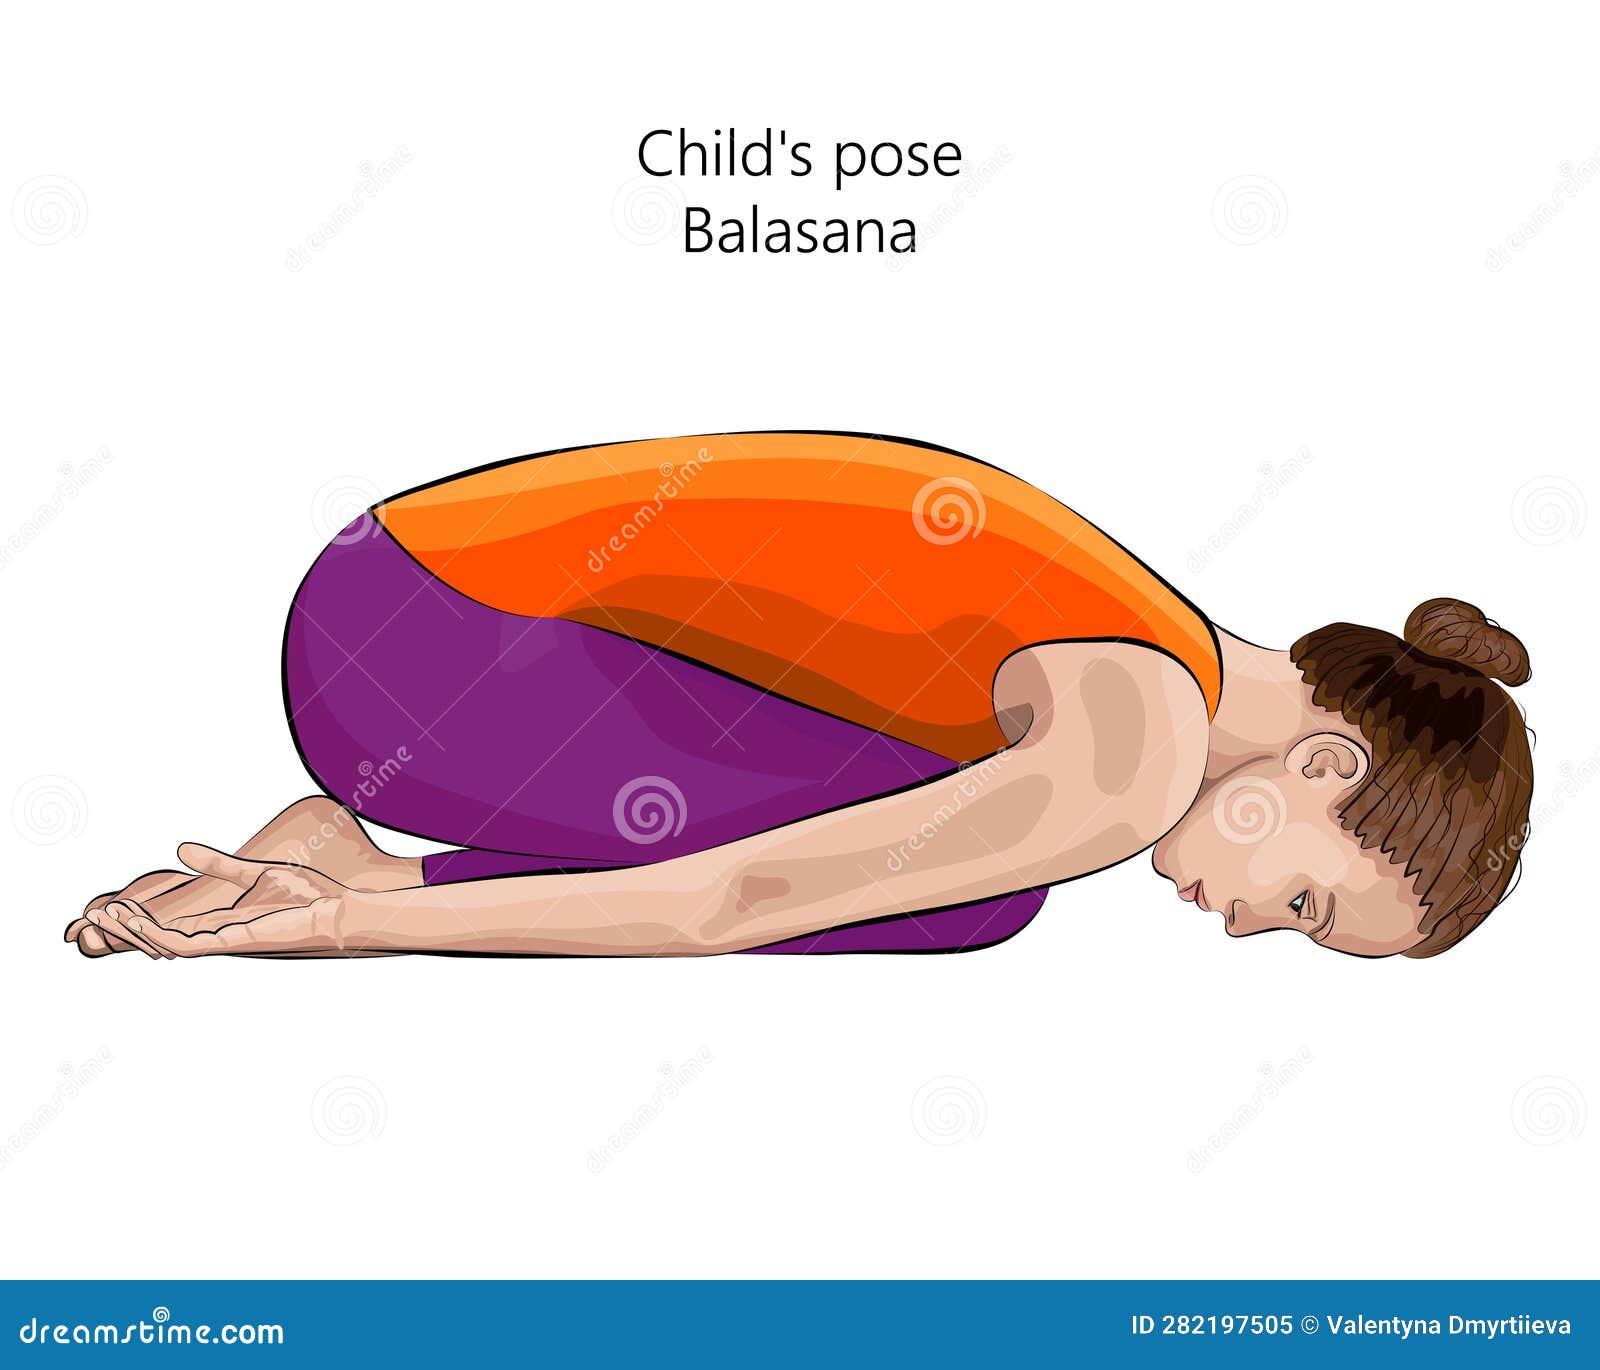 How to do Child's Pose in Yoga (Balasana) - Proper Form, Variations, and  Common Mistakes - The Yoga Nomads